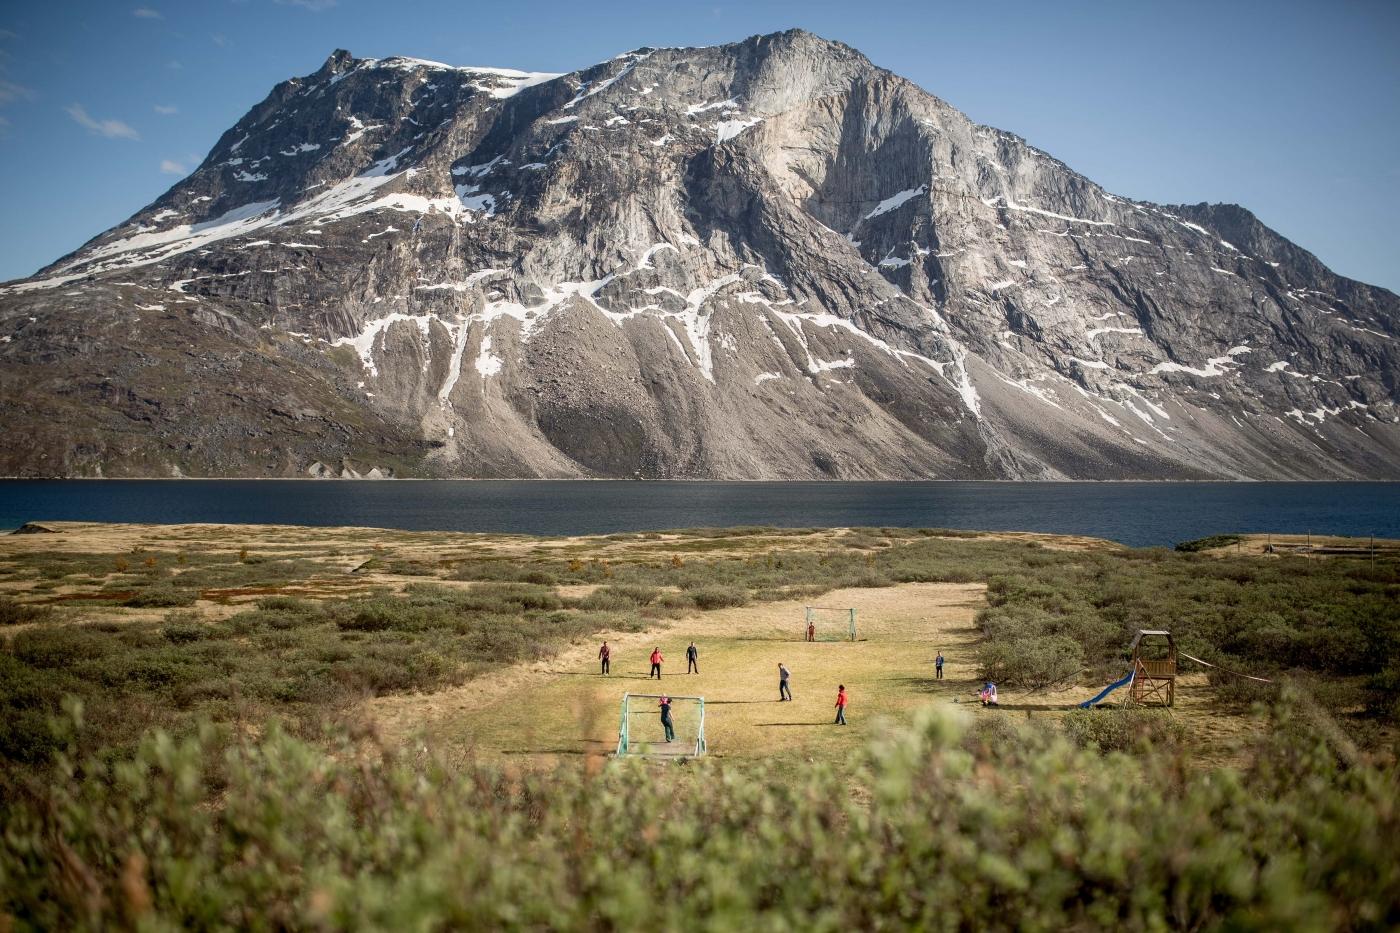 The backcountry soccer or football field at Qooqqut in the fjord near Nuuk in Greenland. Photo by Mads Pihl.jpg